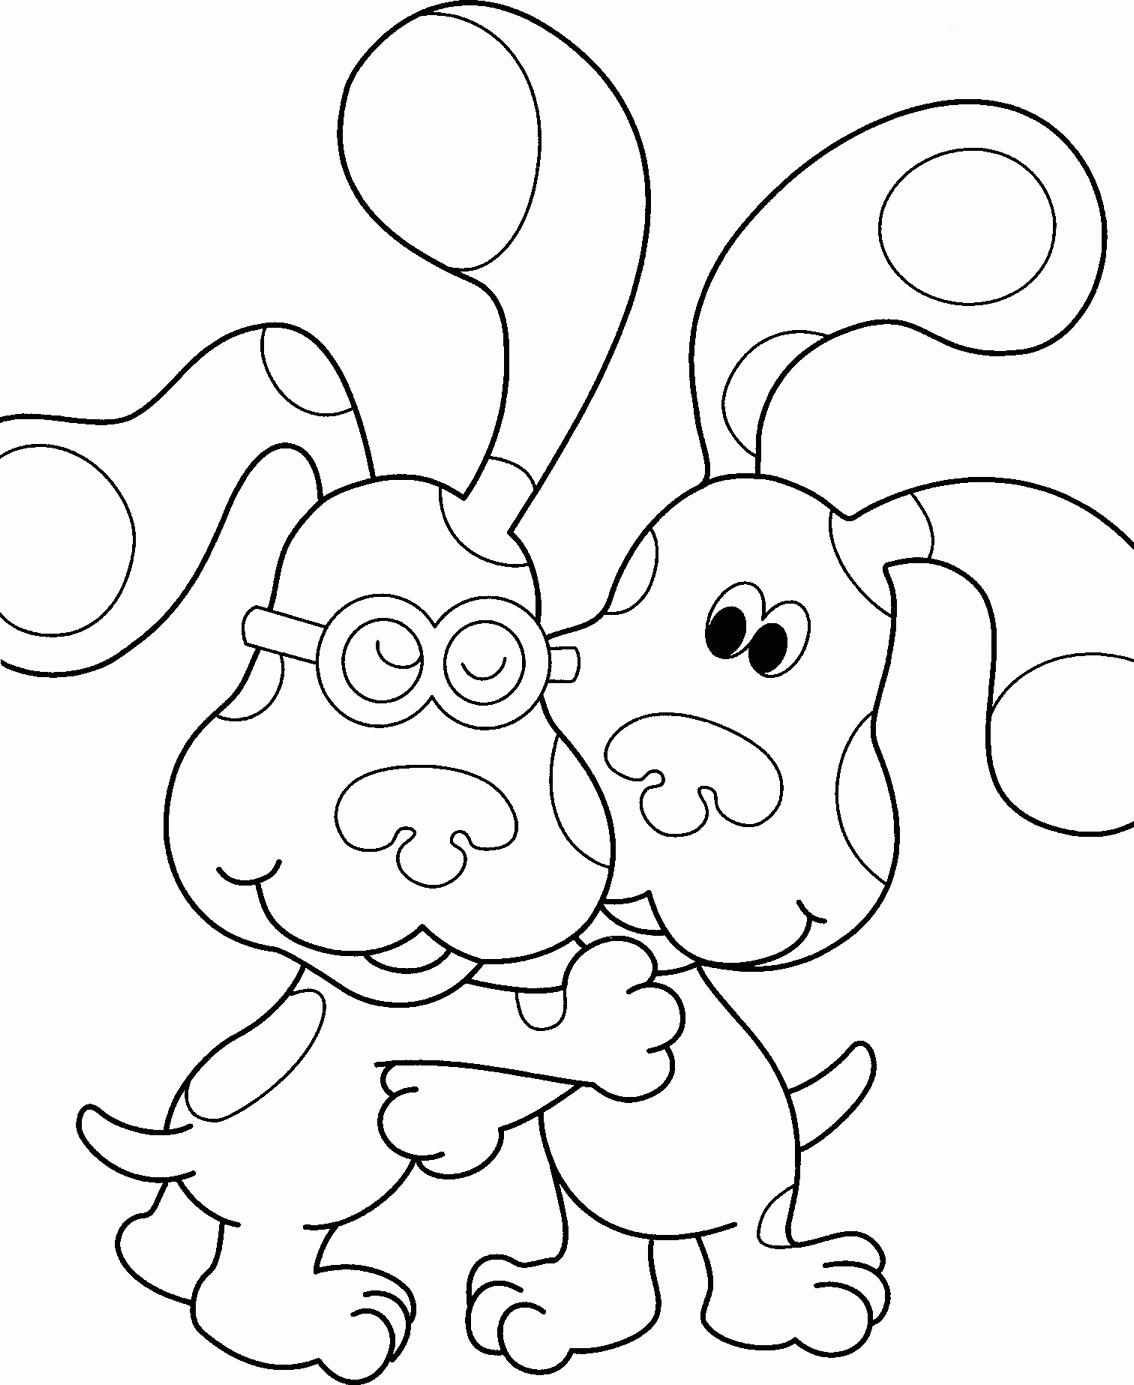 Nick Jr Coloring Pages (6) - Coloring Kids